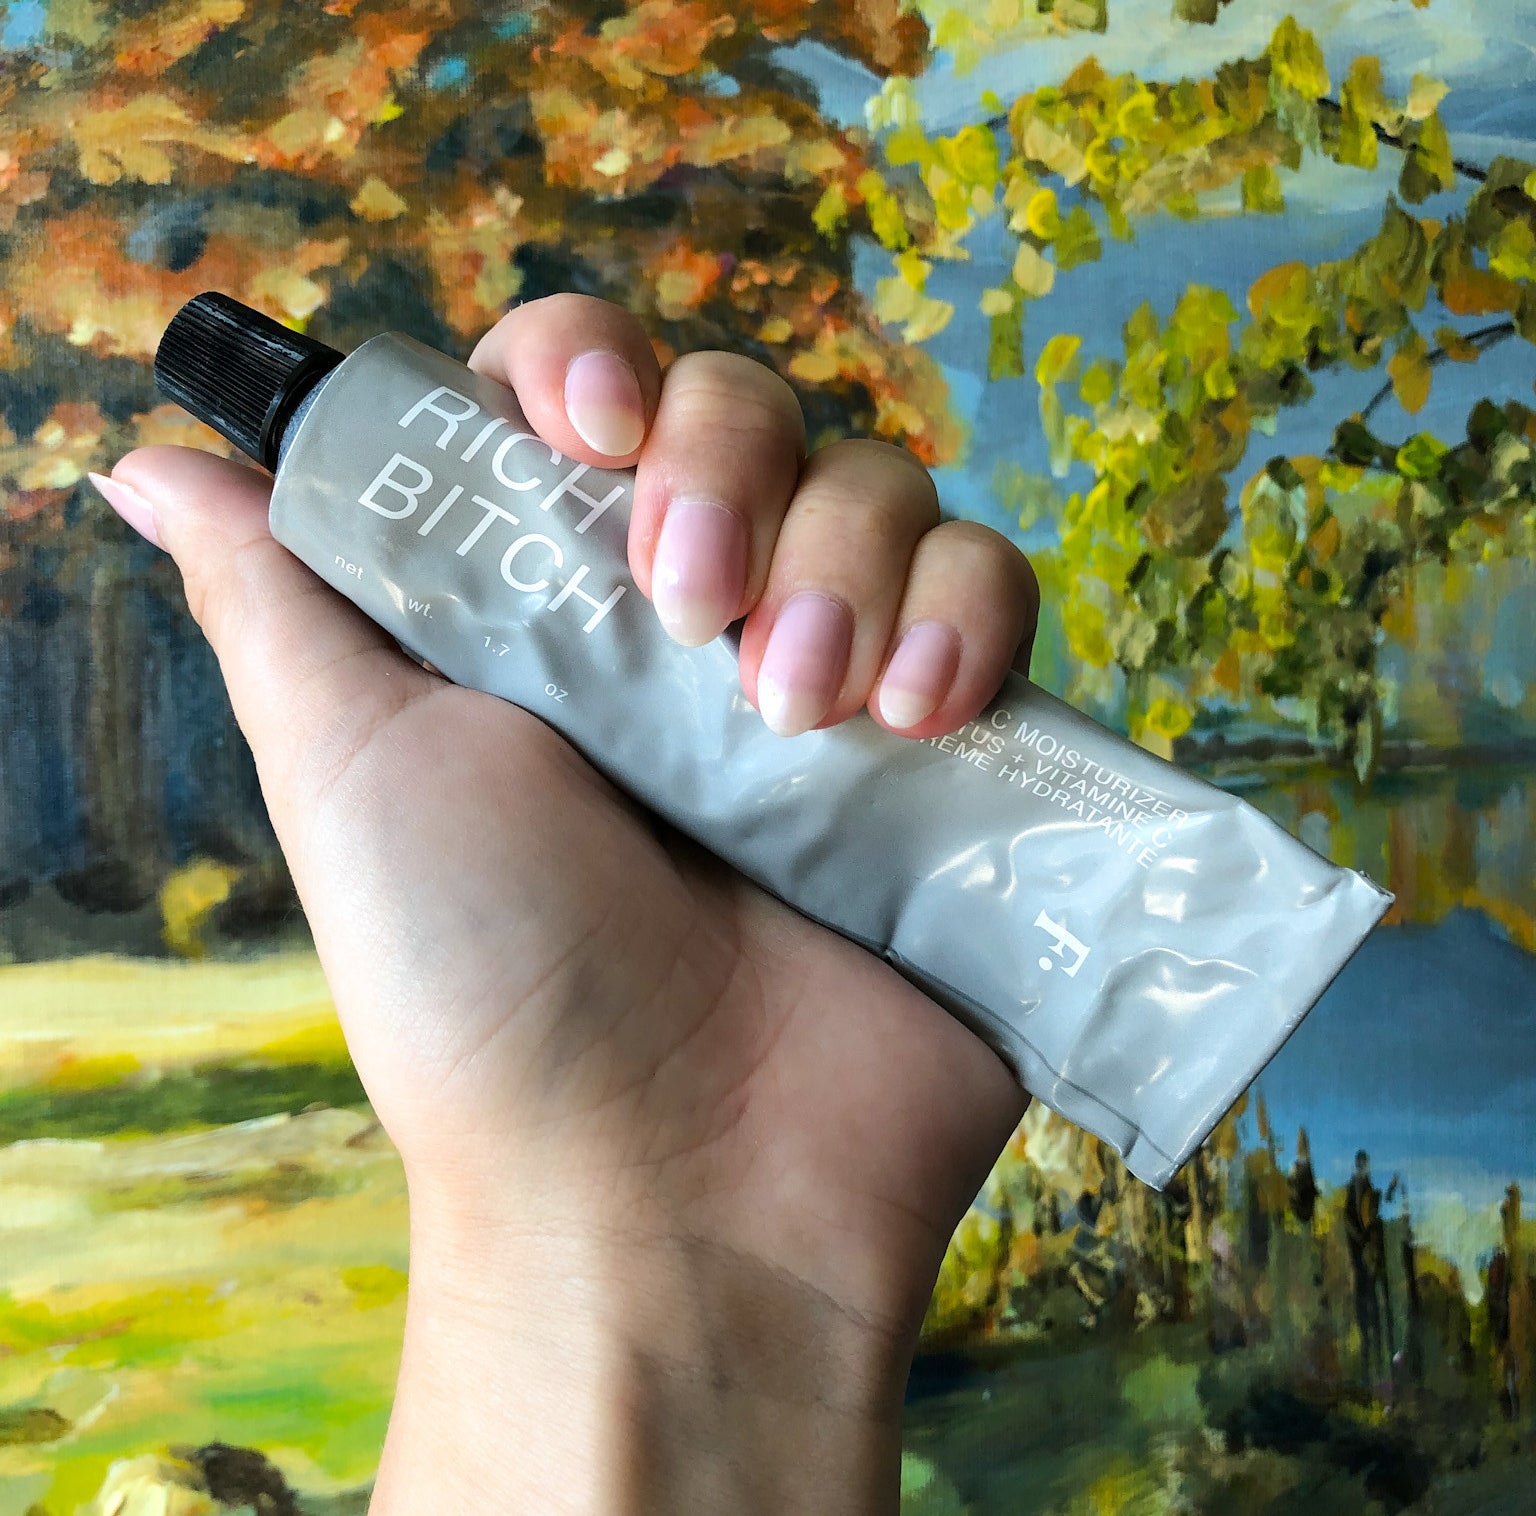 Victoria holding up a tube of the moisturizer against a colourful landscape painting